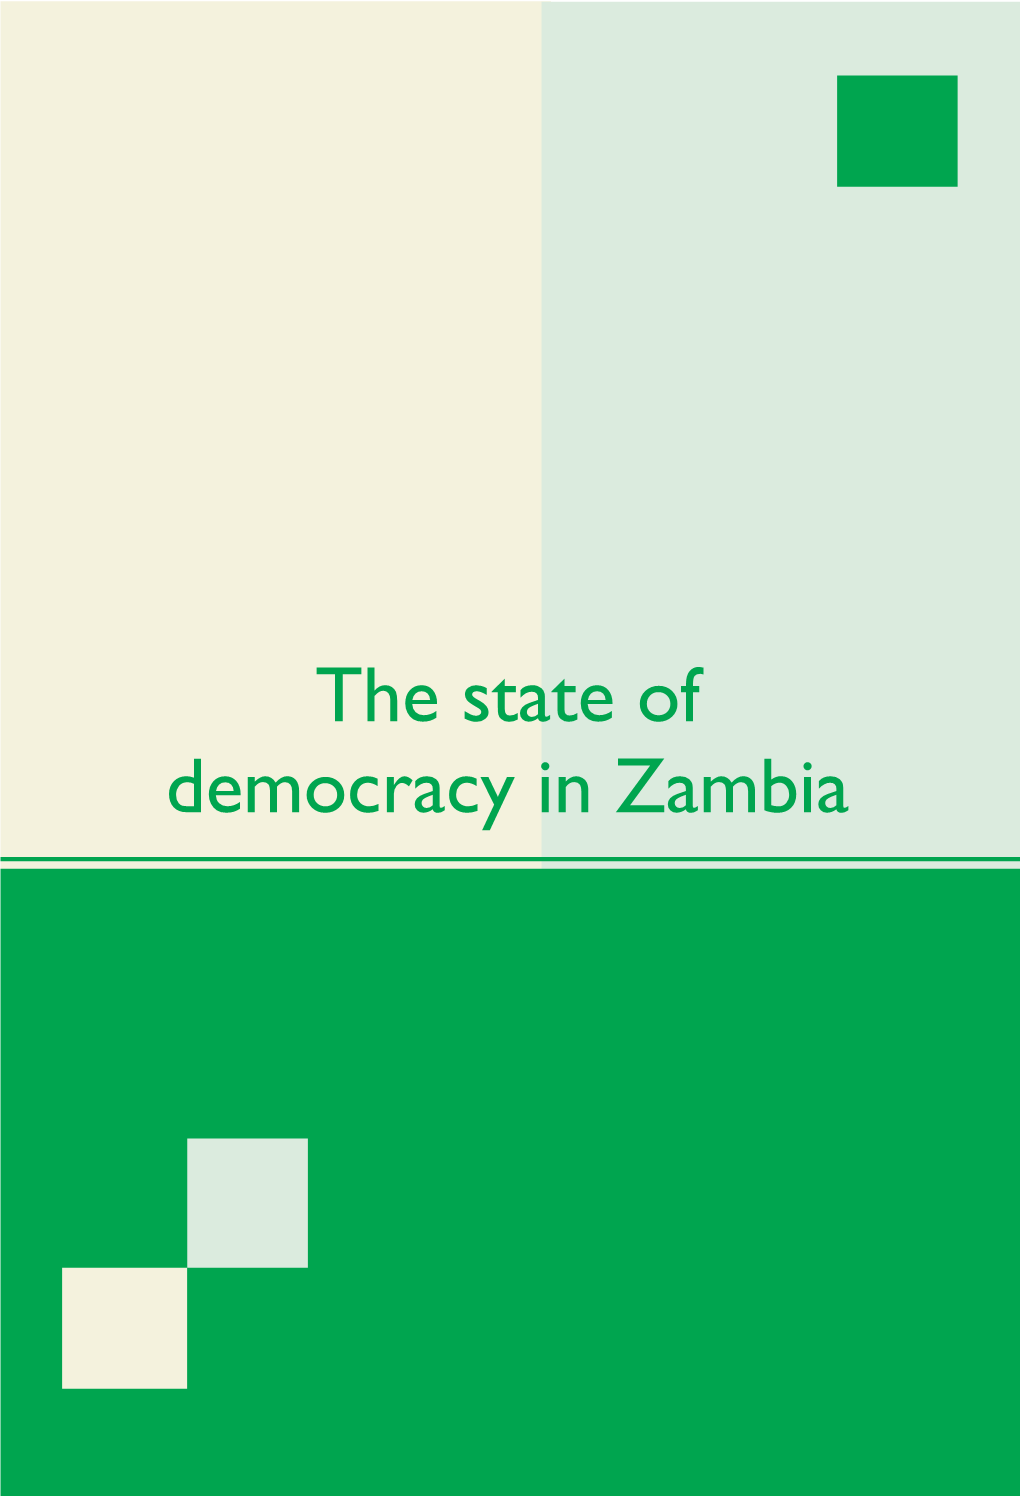 The State of Democracy in Zambia the State of Democracy in Zambia